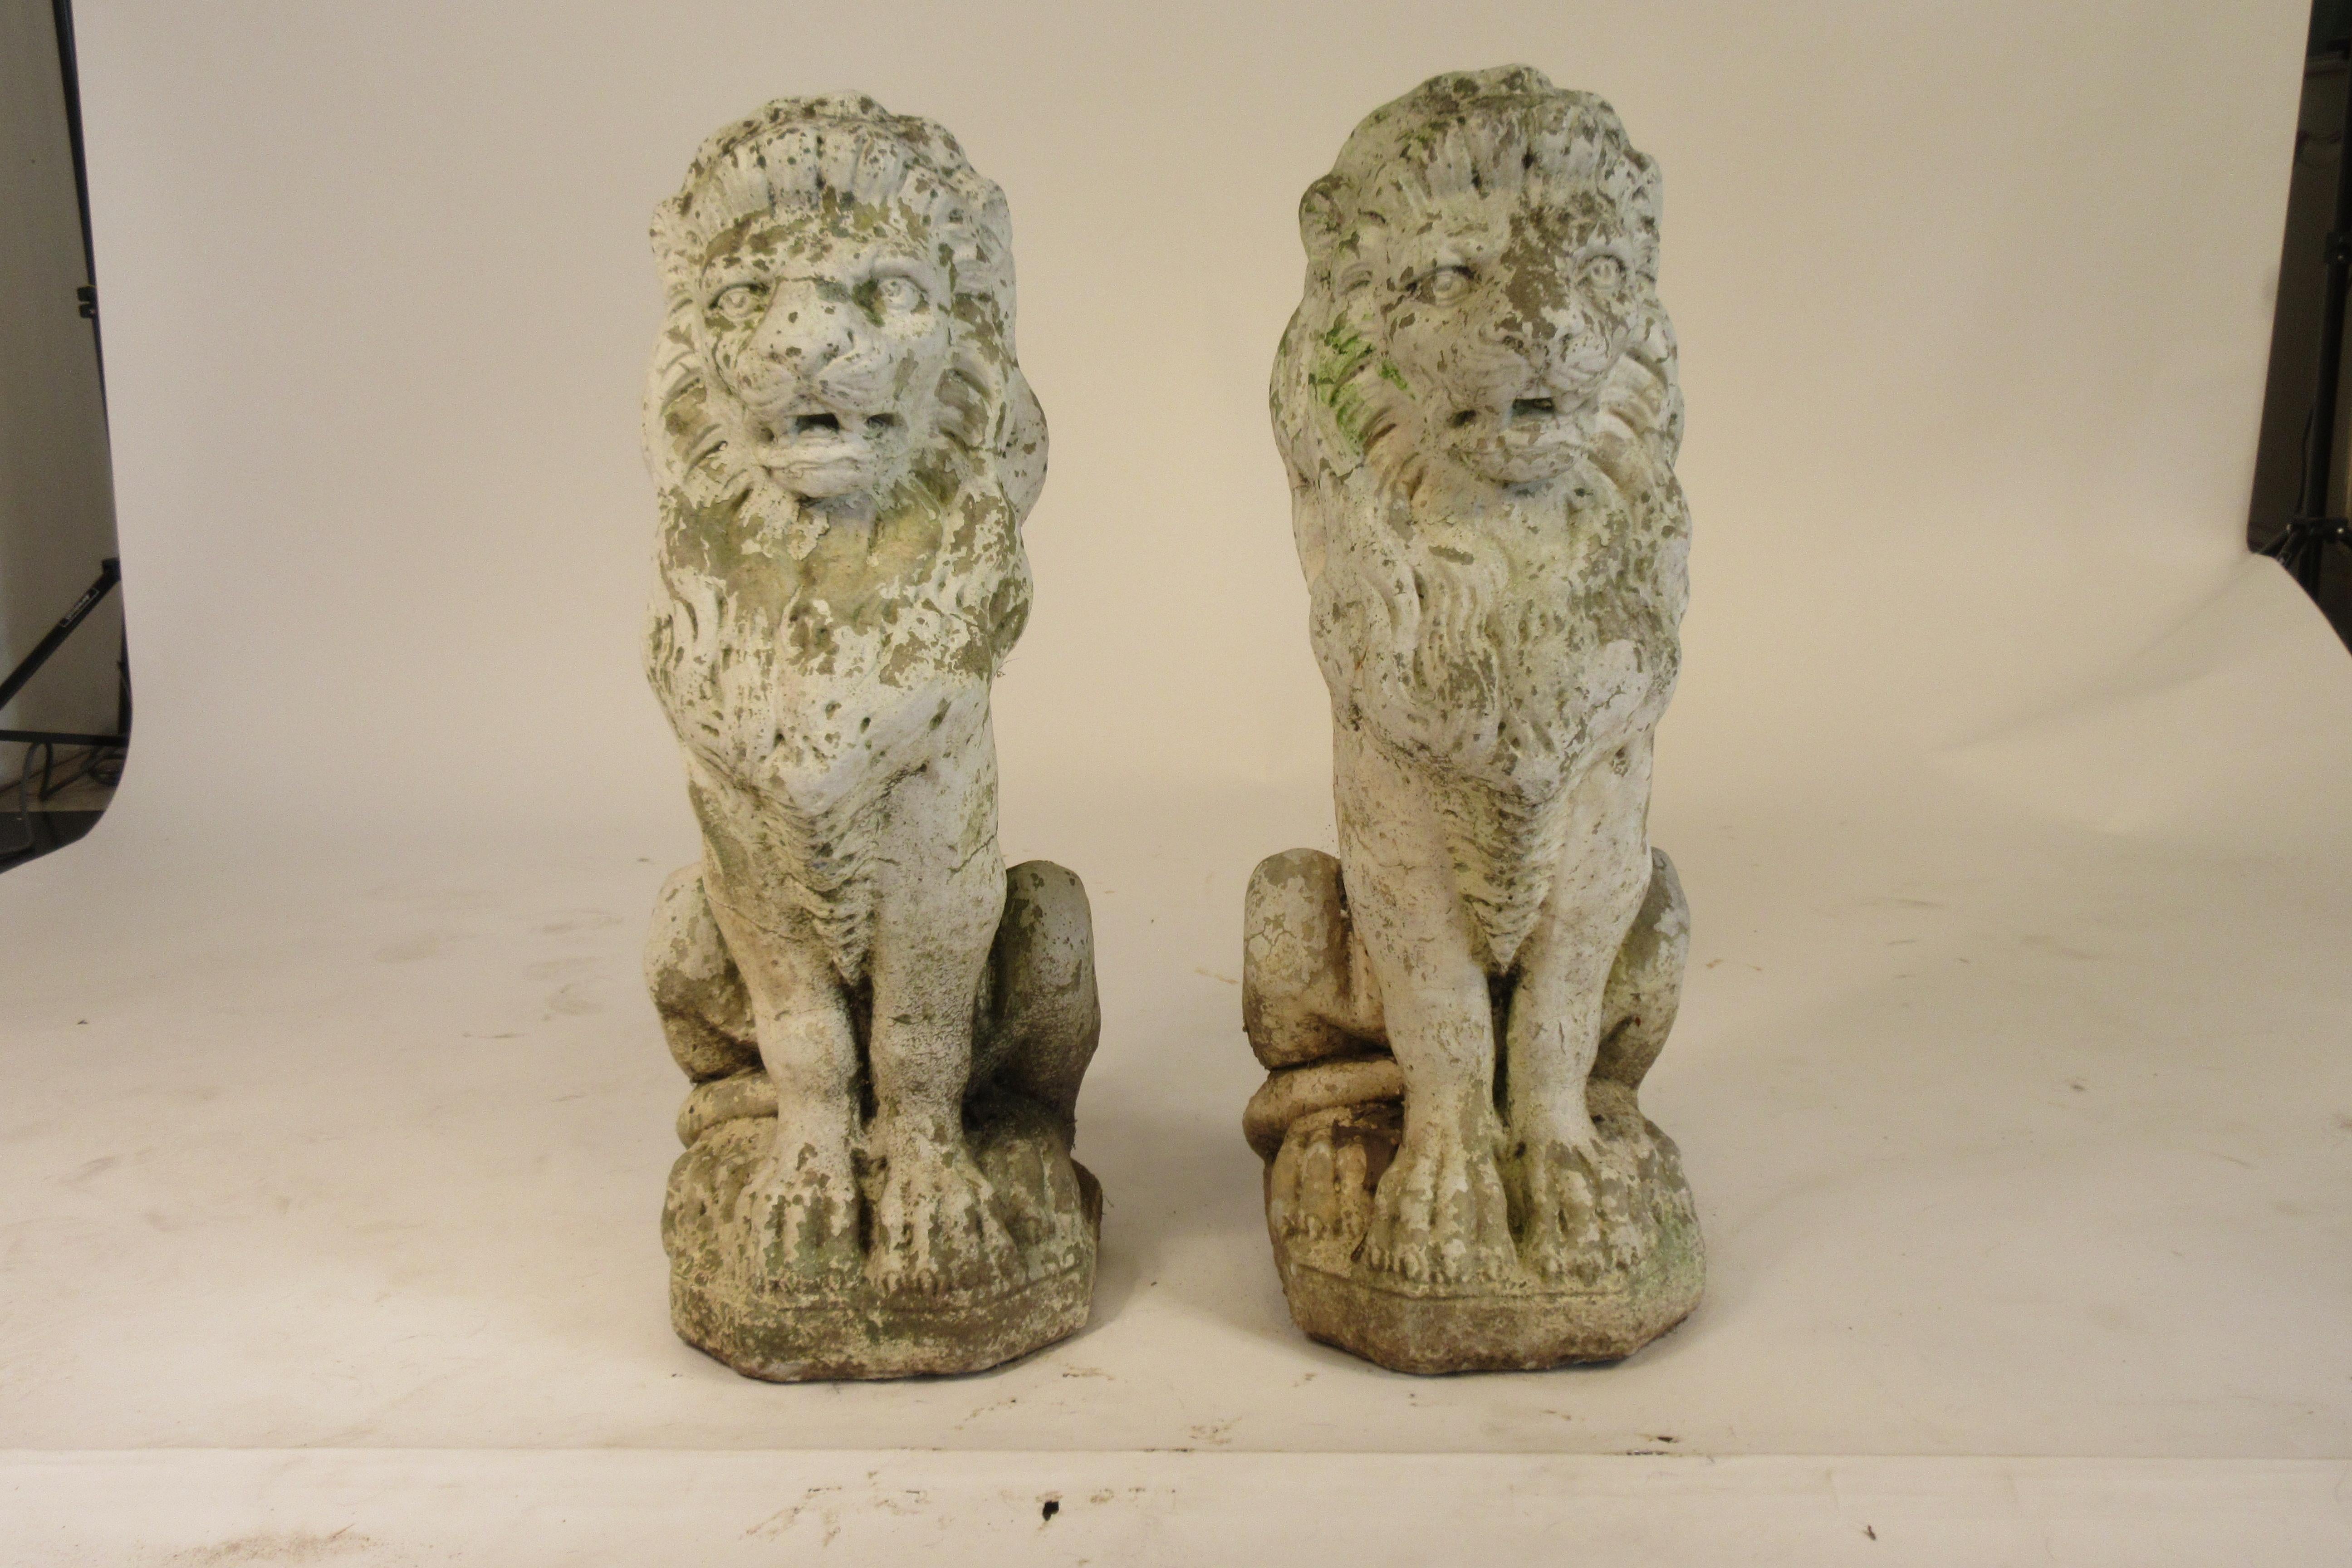 Regal pair of 1940s concrete lions from a Greenwhich Connecticut home.